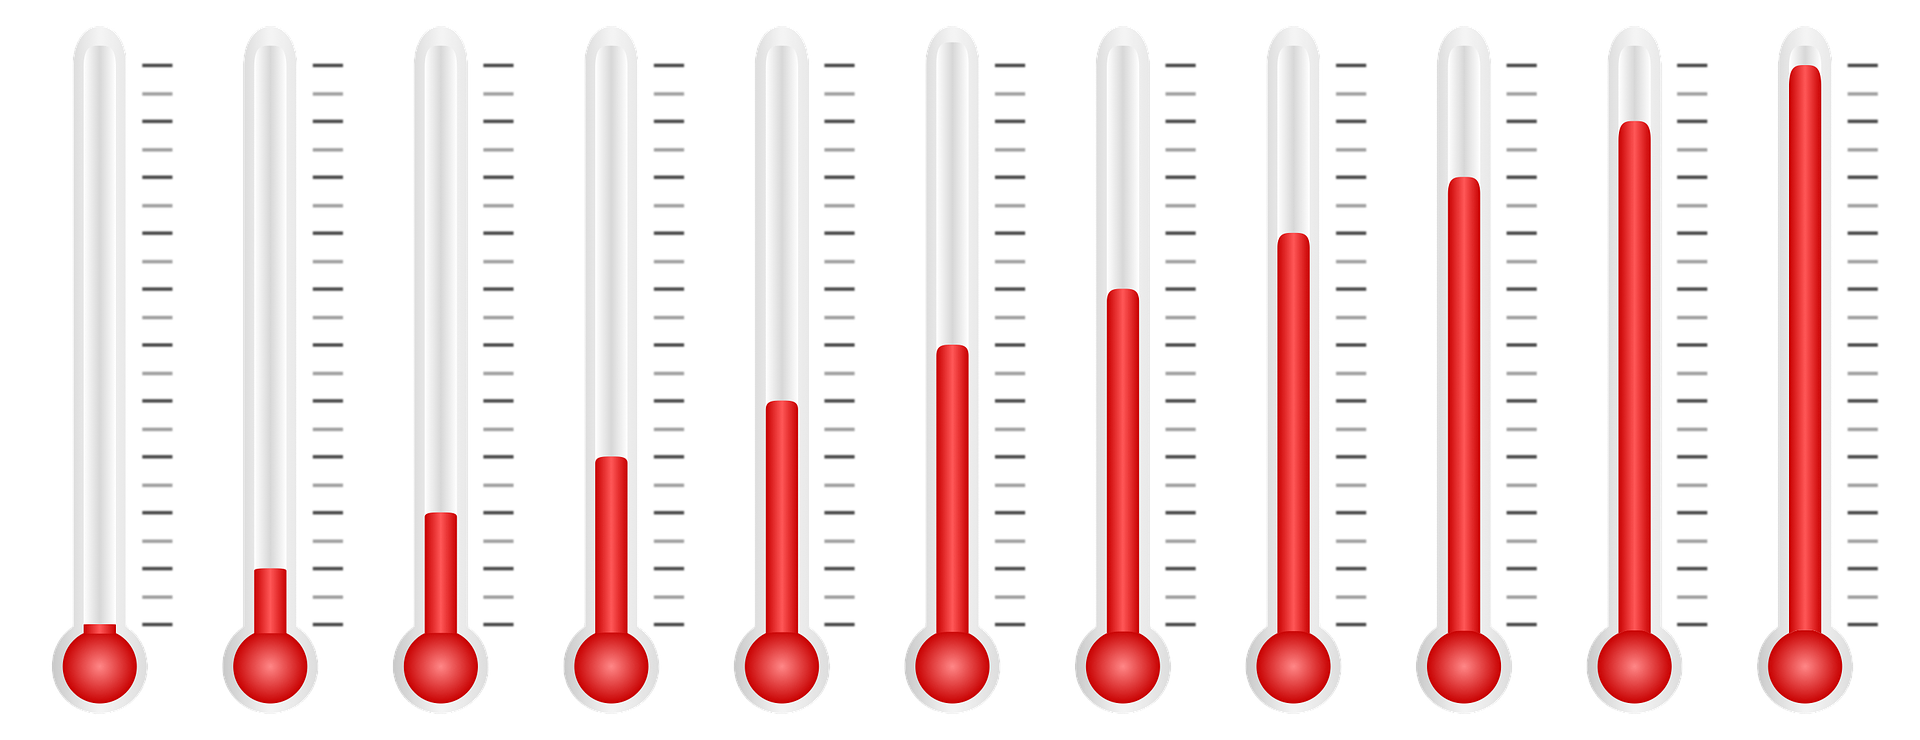 thermometer-1917500_1920.png